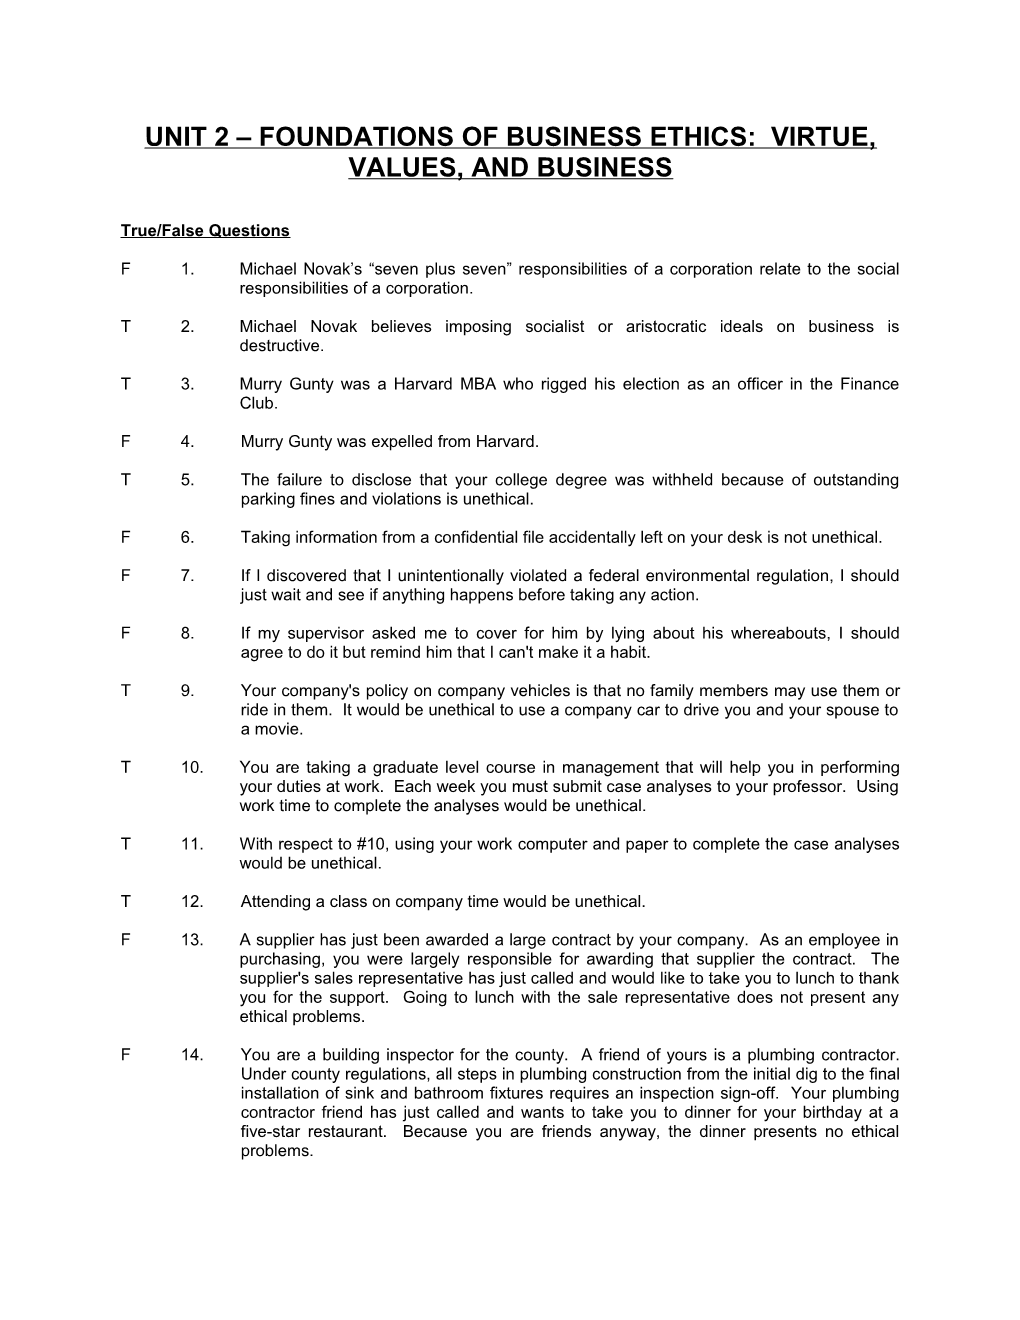 Unit 2 Foundations of Business Ethics: Virtue, Values, and Business